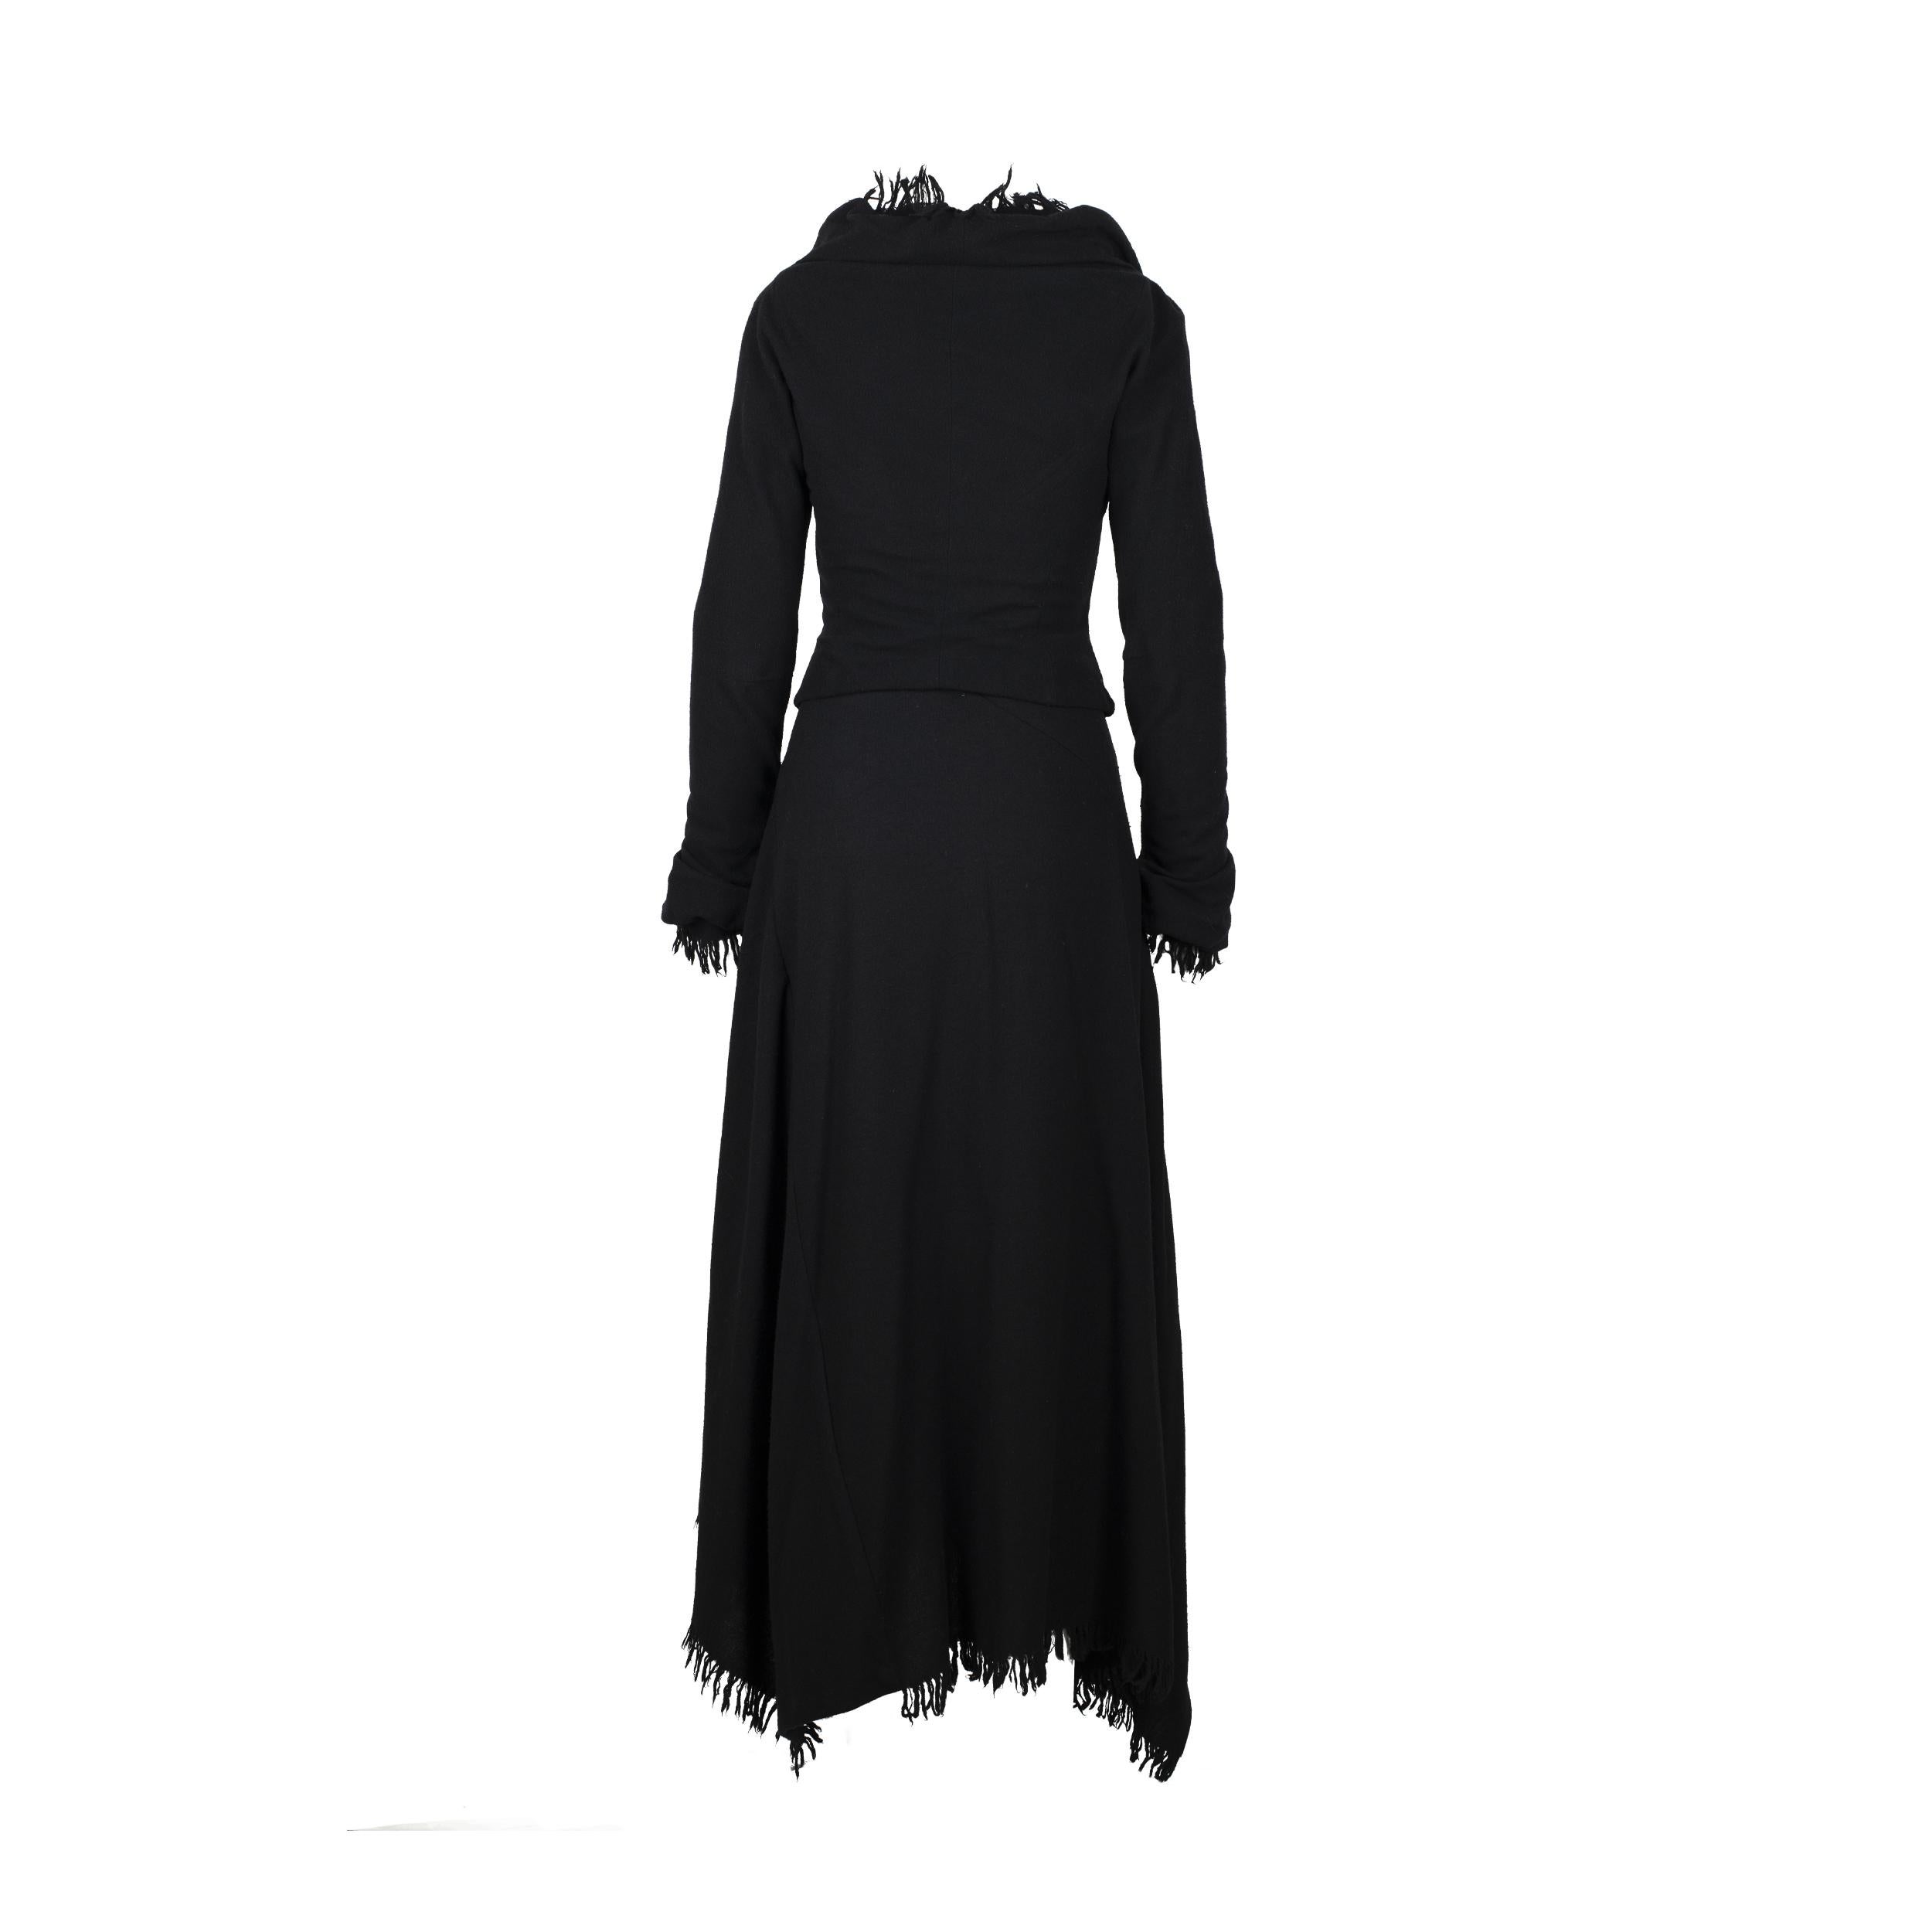 Vivienne Westwood Black set, including a jacket with long sleeve and button fastening, and long asymmetrical skirt with zip fastening.

* Two small holes barely visible.

Total top length - 44 cm
Bust - 41 cm
Shoulders - 37 cm
Sleeves - 68 cm
Total